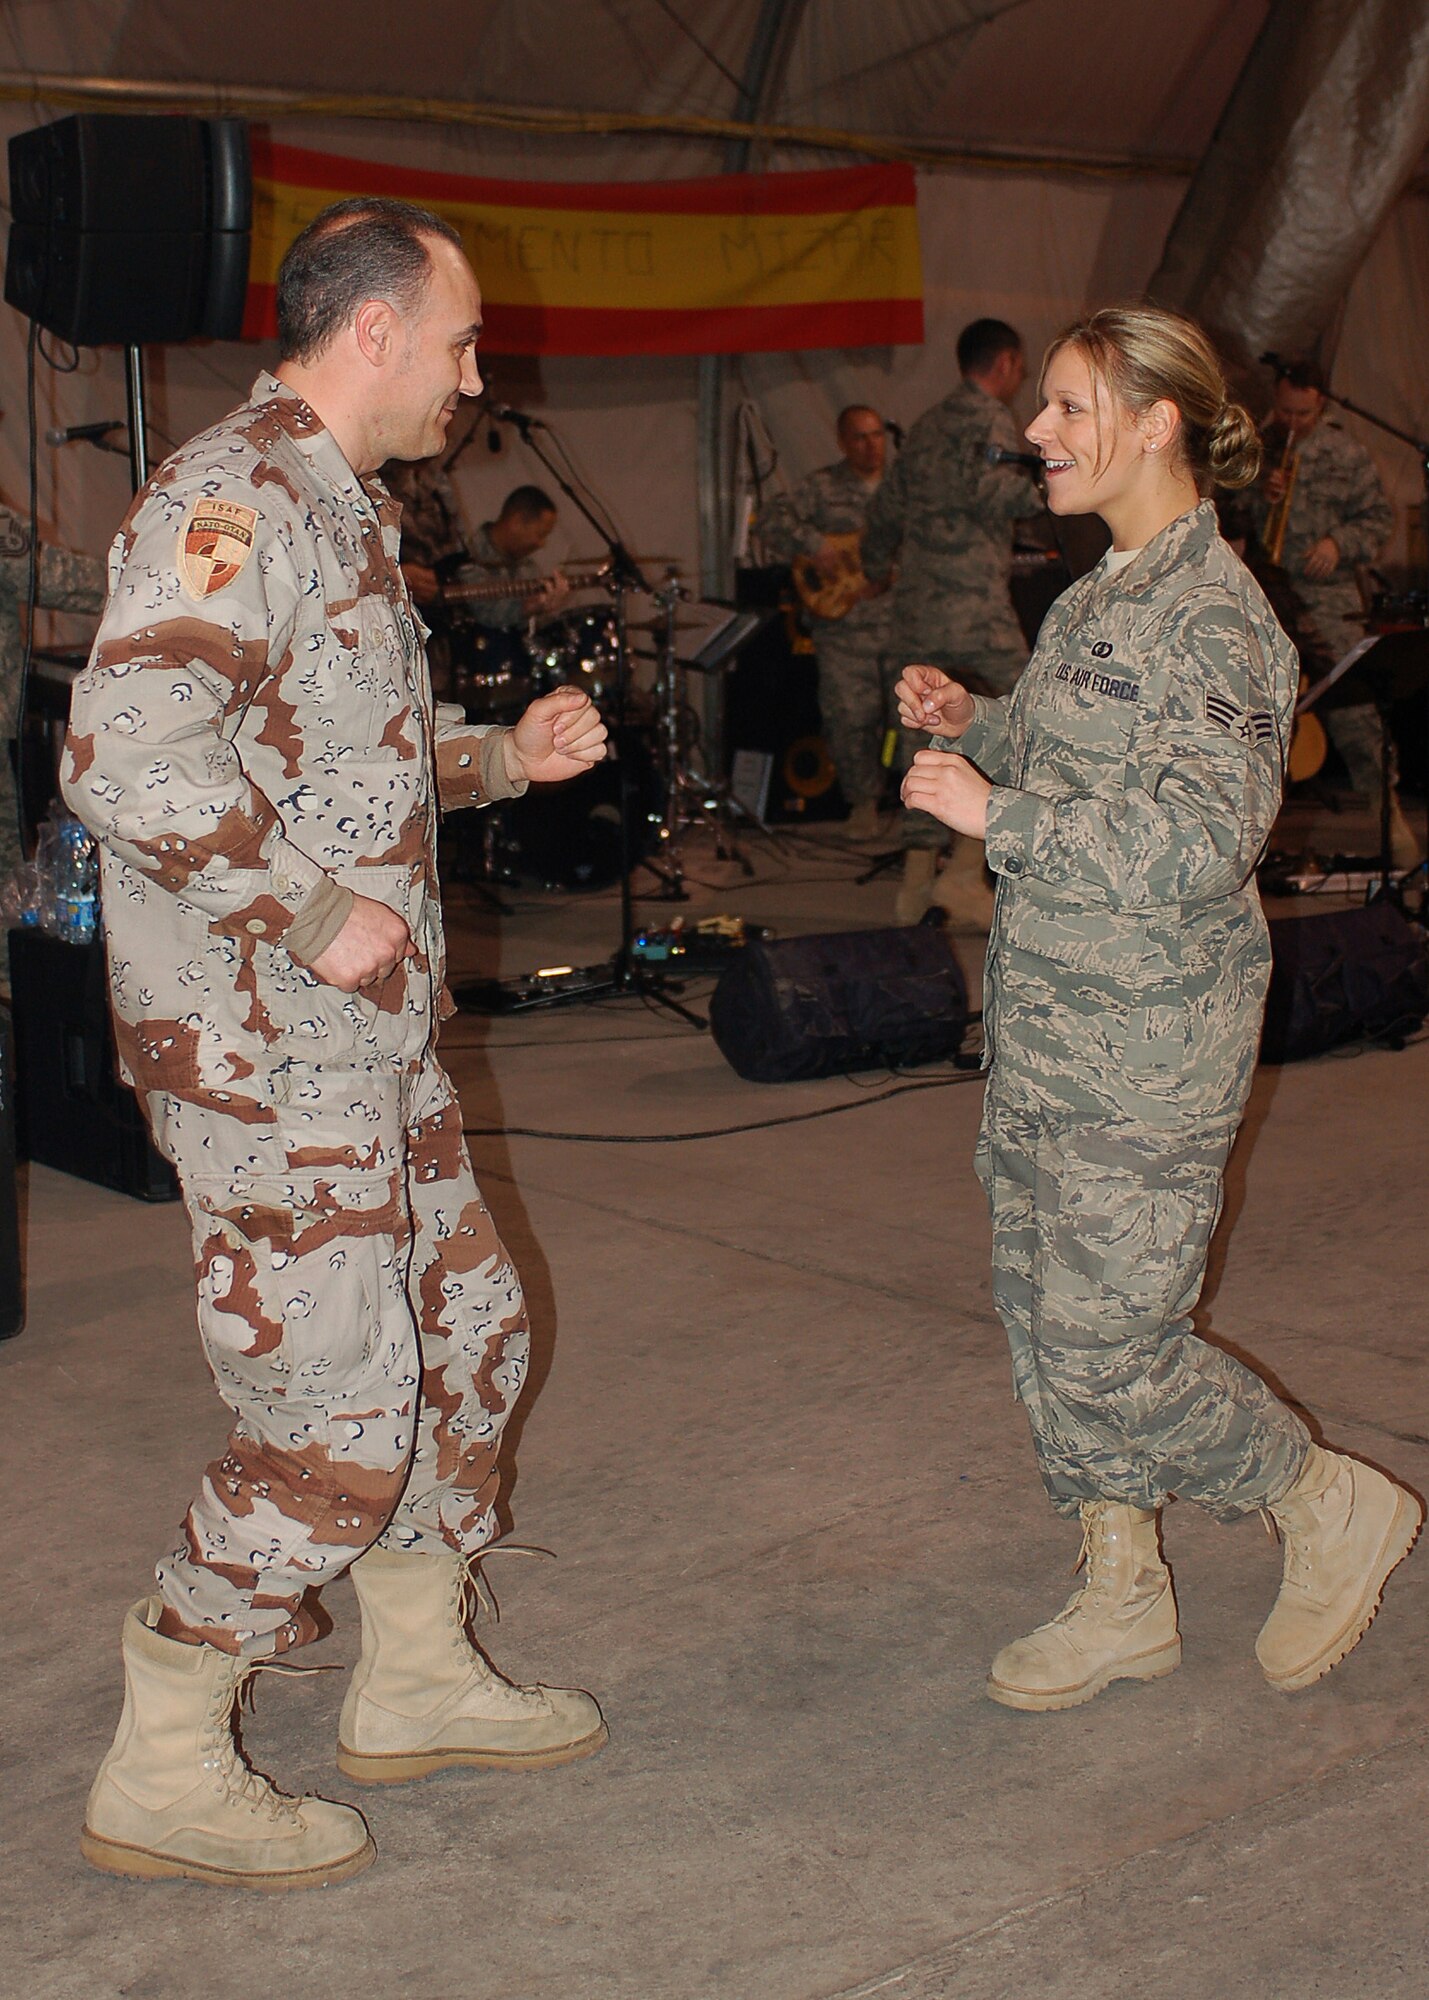 Senior Airman Courtney Clifford dances with a coalition partner at the Spanish Air Force's hangar, Mar. 20, at Manas Air Base, Kyrgyzstan. Airman Clifford is the lead female vocalist for the band Sirocco, the U.S. Air Forces Central Expeditionary Band. The band members are deployed to Southwest Asia from the U.S. Air Forces in Europe Band at Sembach AB, Germany. (U.S. Air Force photo/Tech. Sgt. Elizabeth Weinberg) 